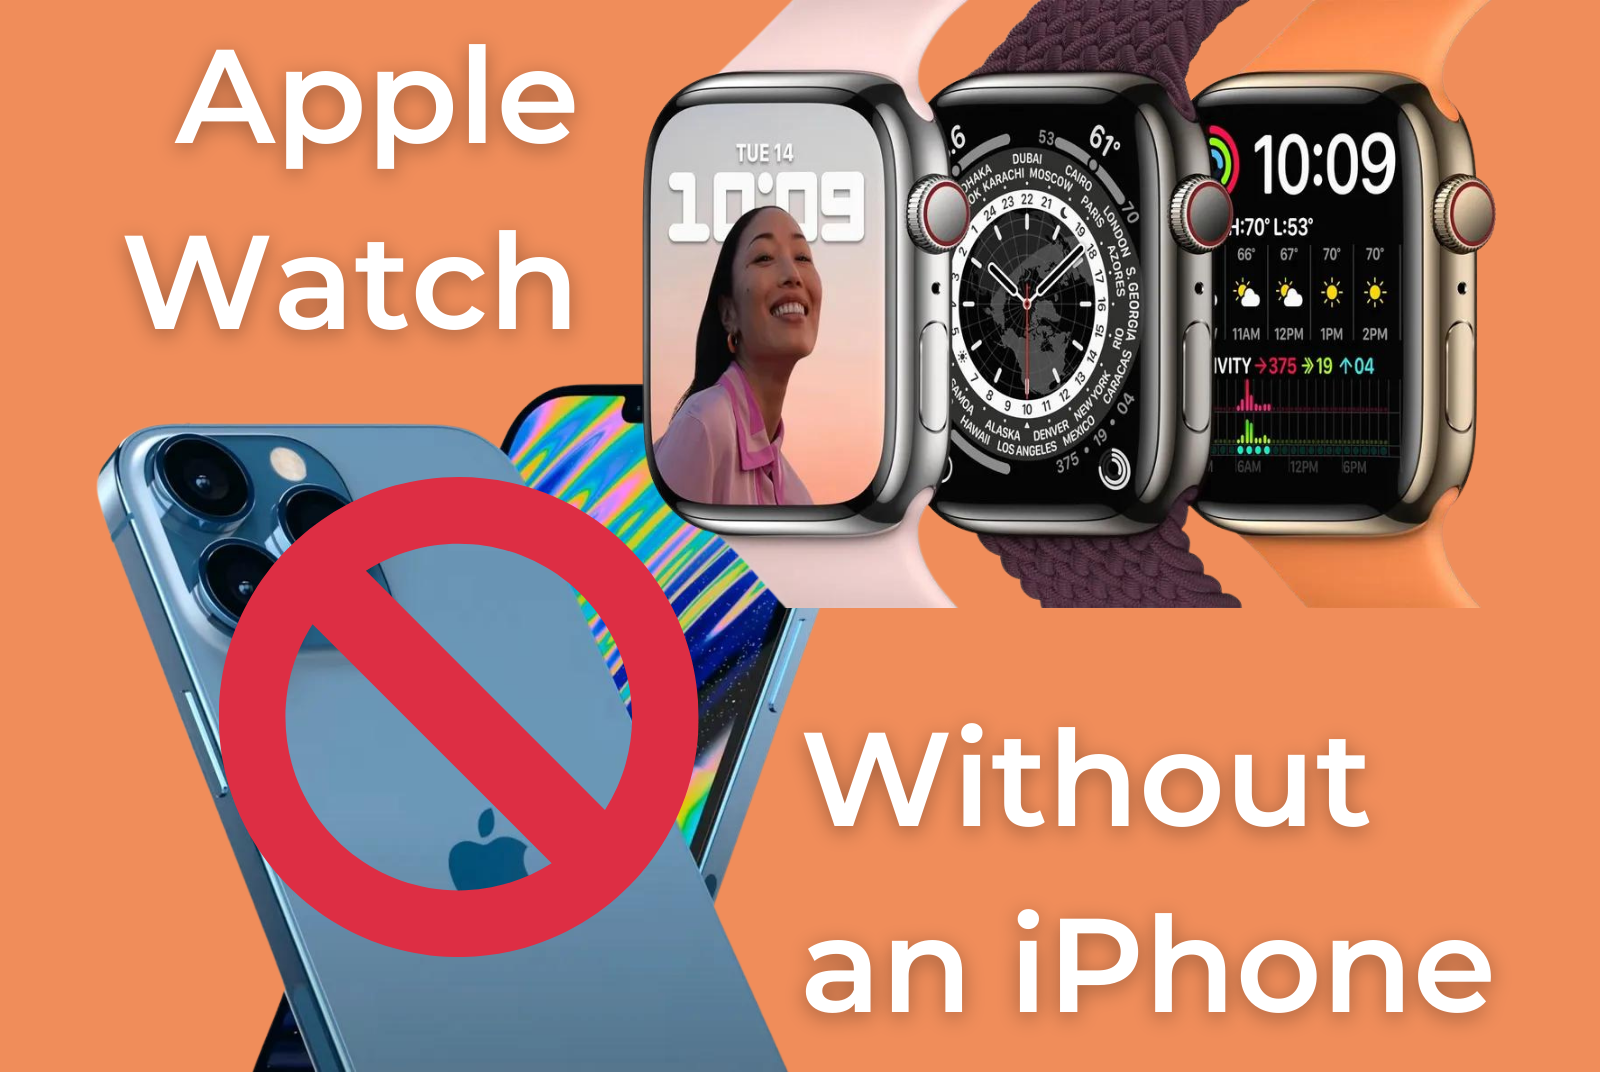 Can you use an apple watch without an iPhone?